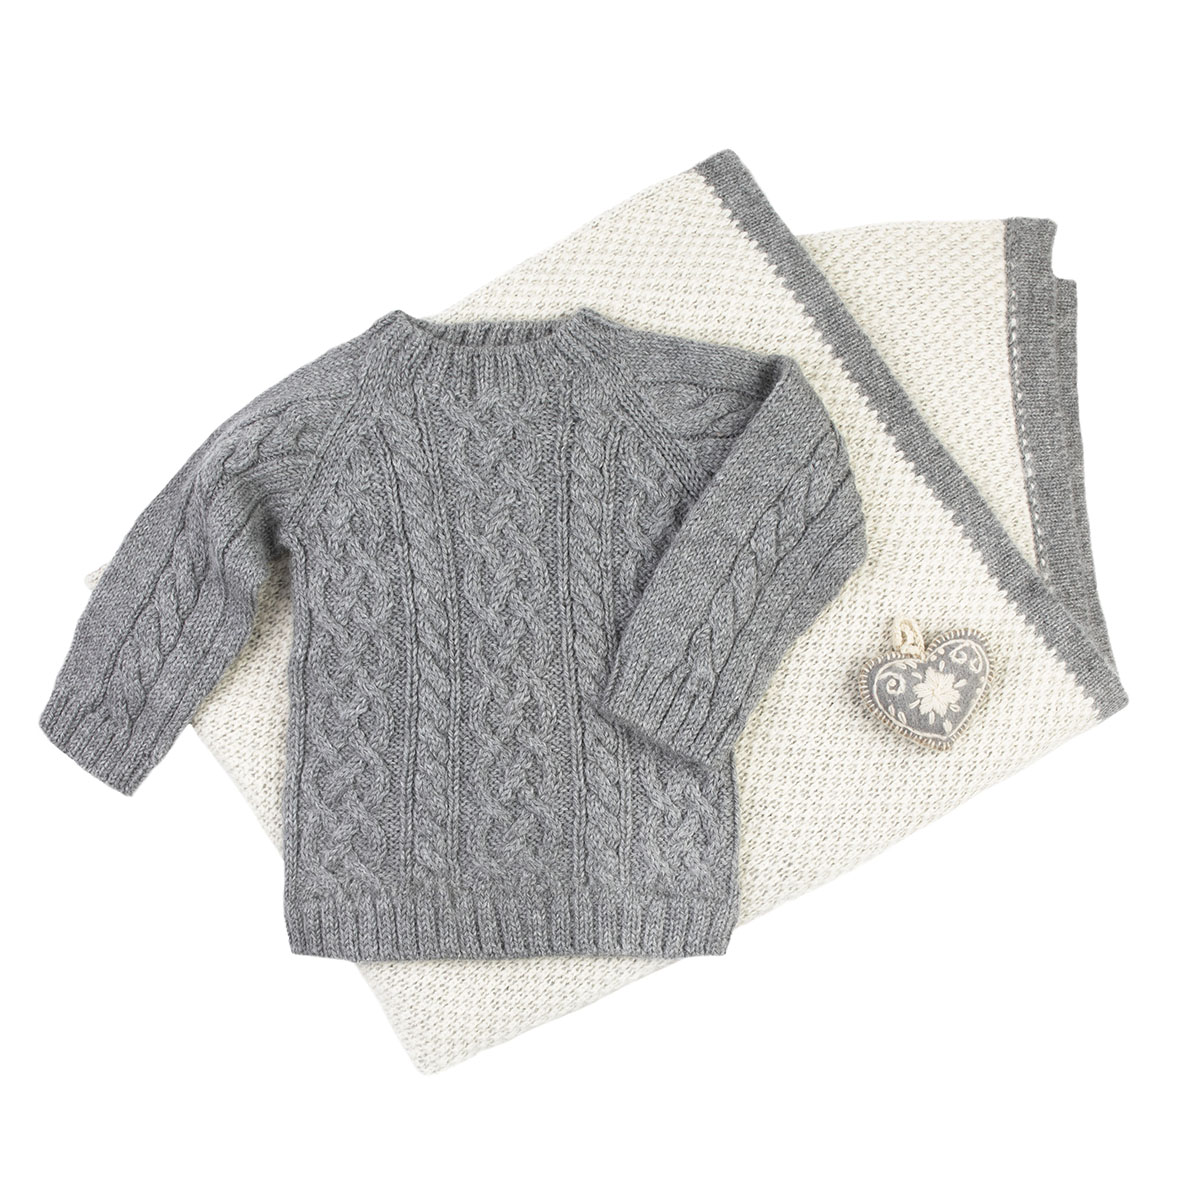 Hand knitted Grey Jumper in intricate Cable knit Clothing Unisex Kids Clothing Unisex Baby Clothing Jumpers 